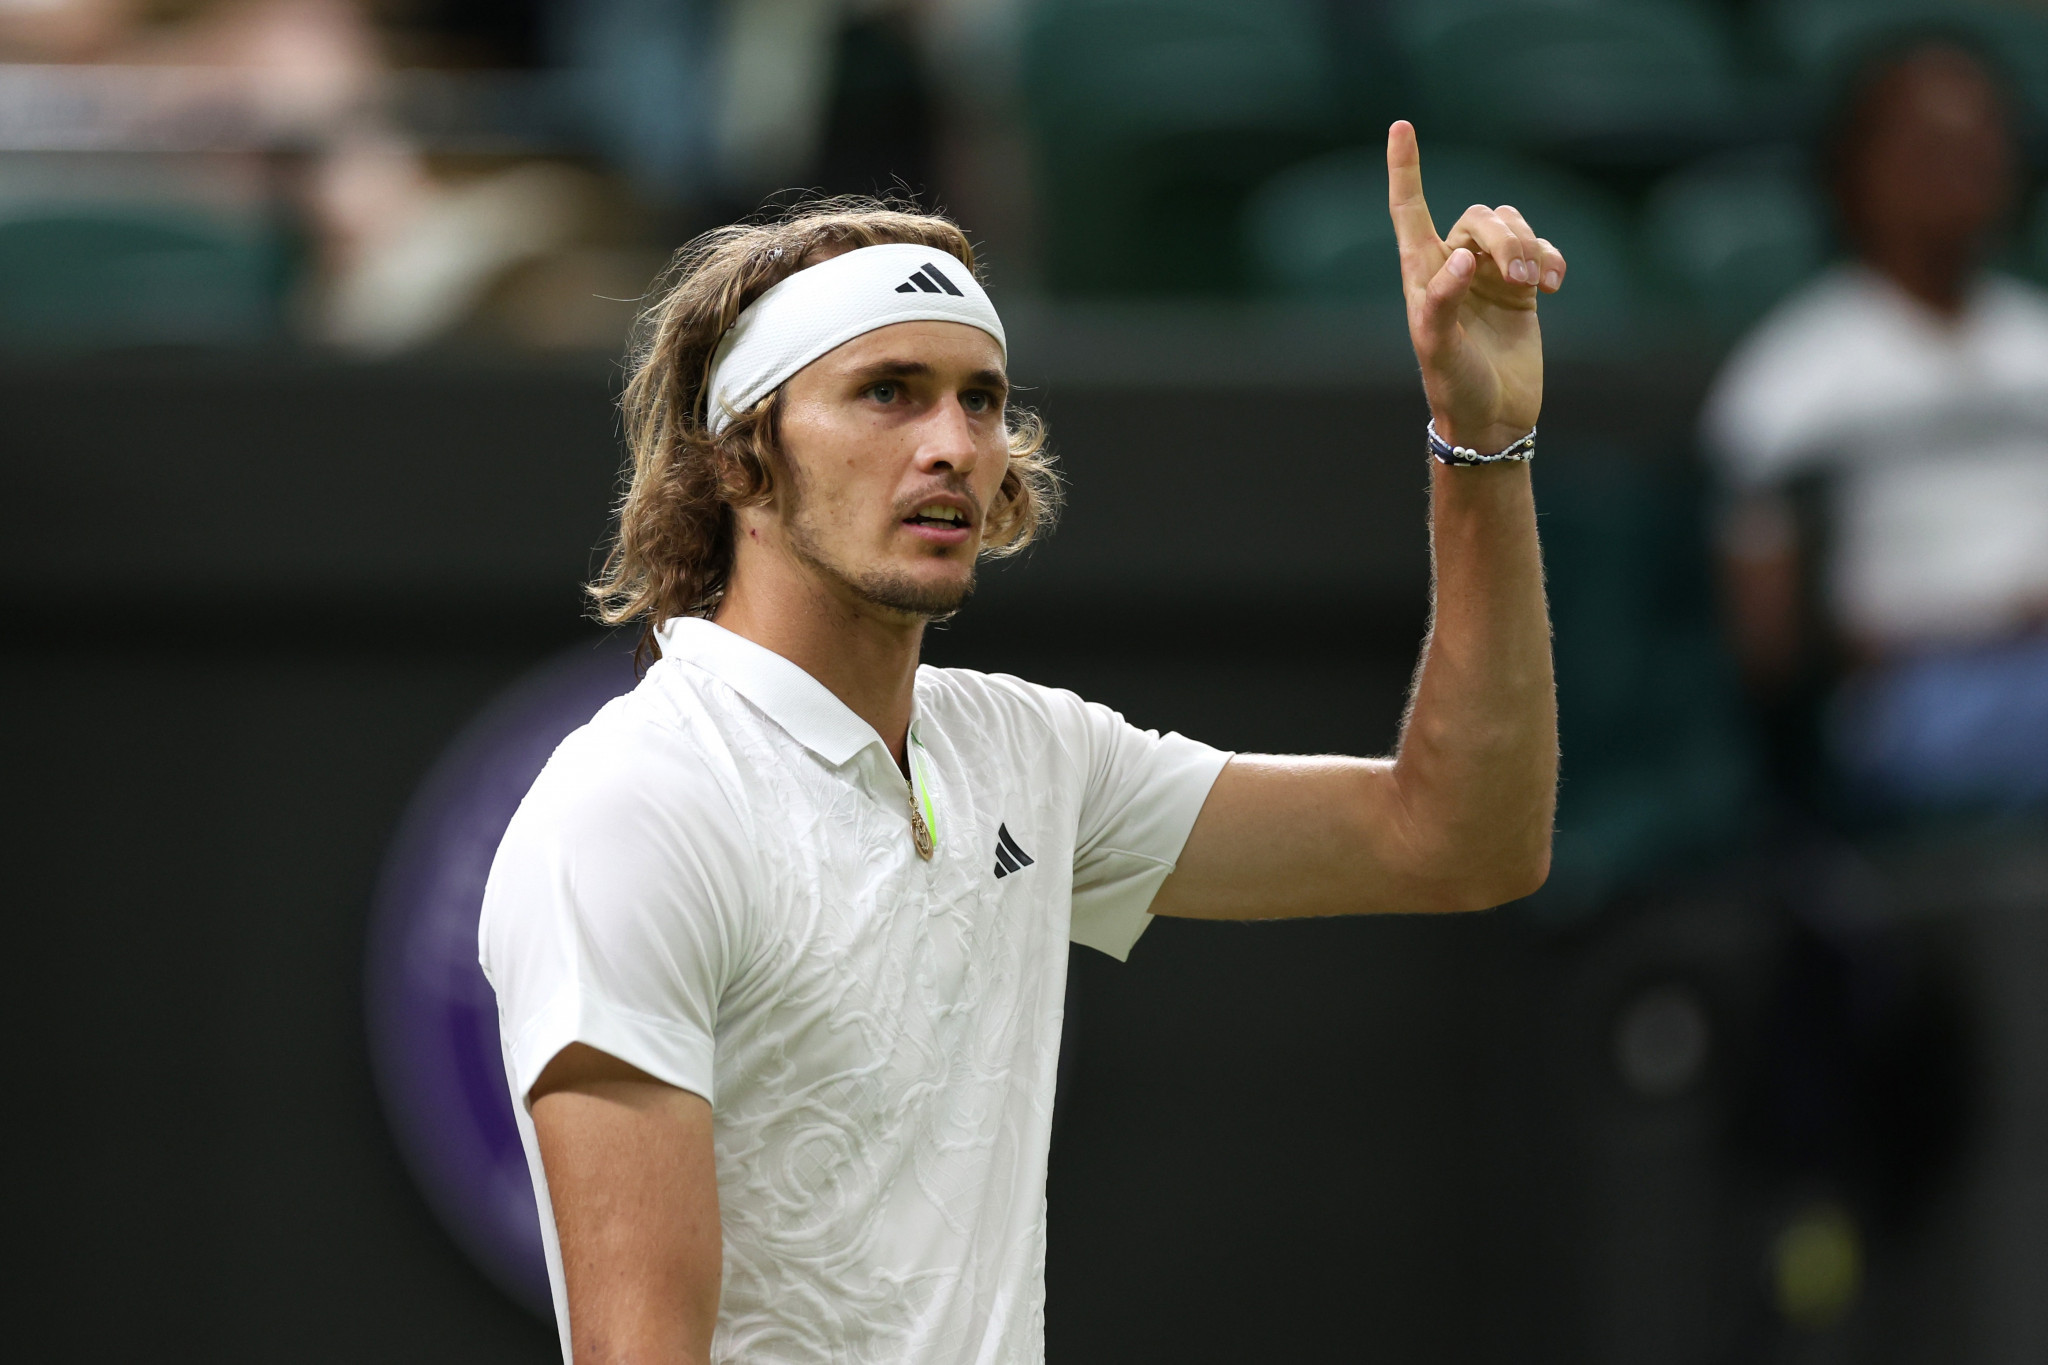 Olympic champion Zverev facing fresh claims of abuse by another ex-girlfriend